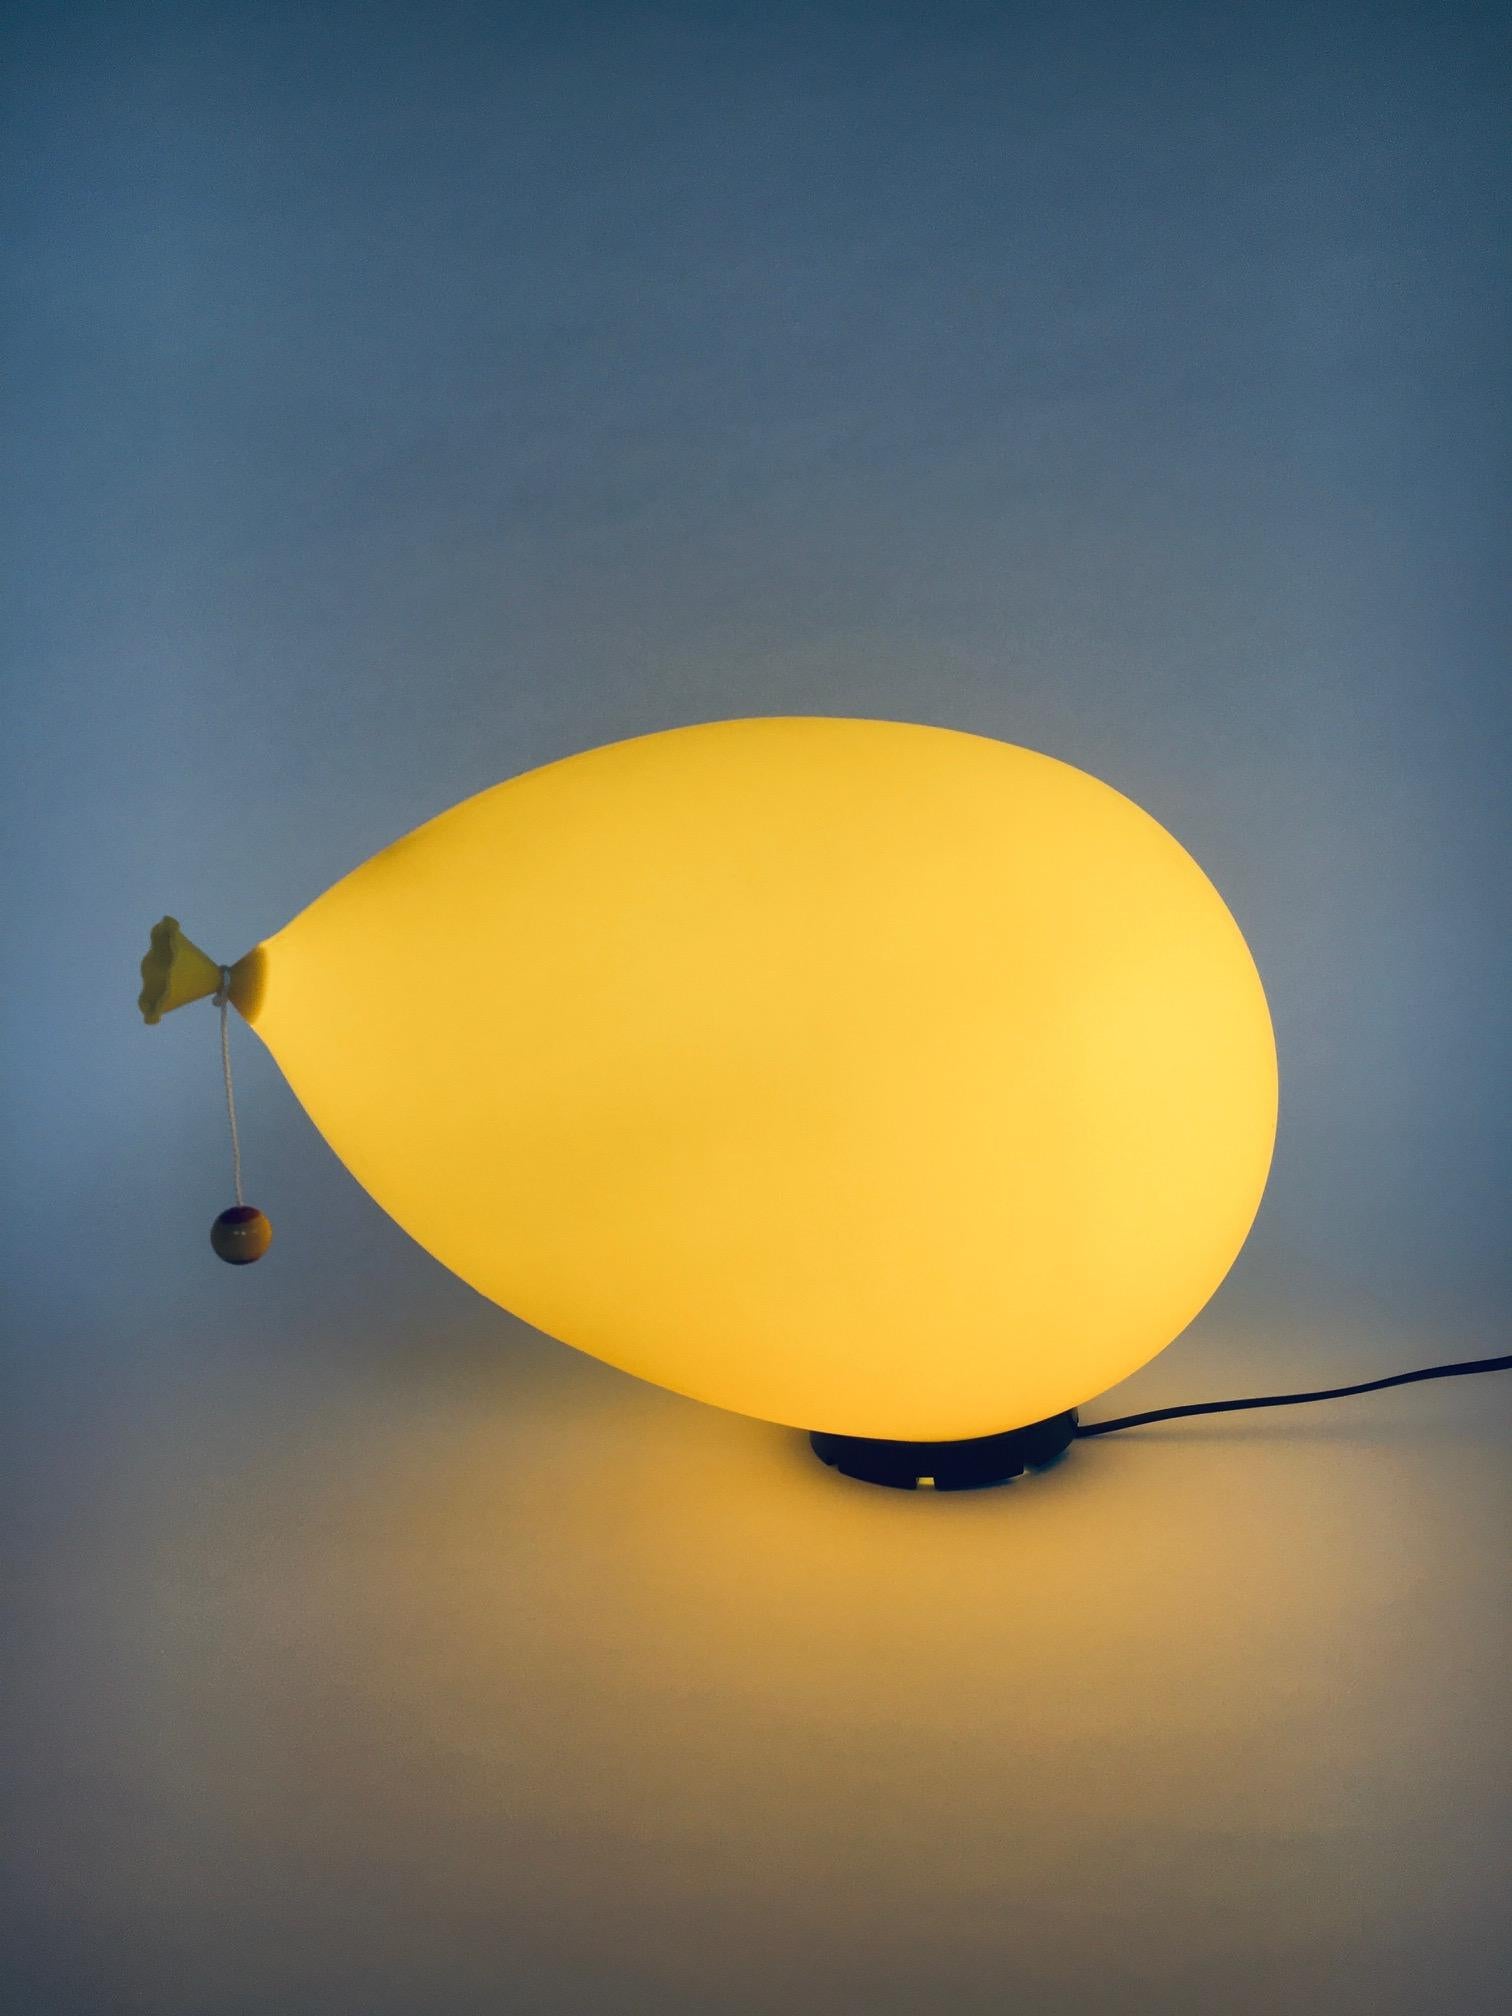 Vintage Postmodern design XXL BALLOON lamp by Yves Christin for Bilumen, made in Italy 1980's. Yellow version wall, table or floor lamp in all plastic construction. This is the largest version. Patent number 20903 B/84. All original condition with